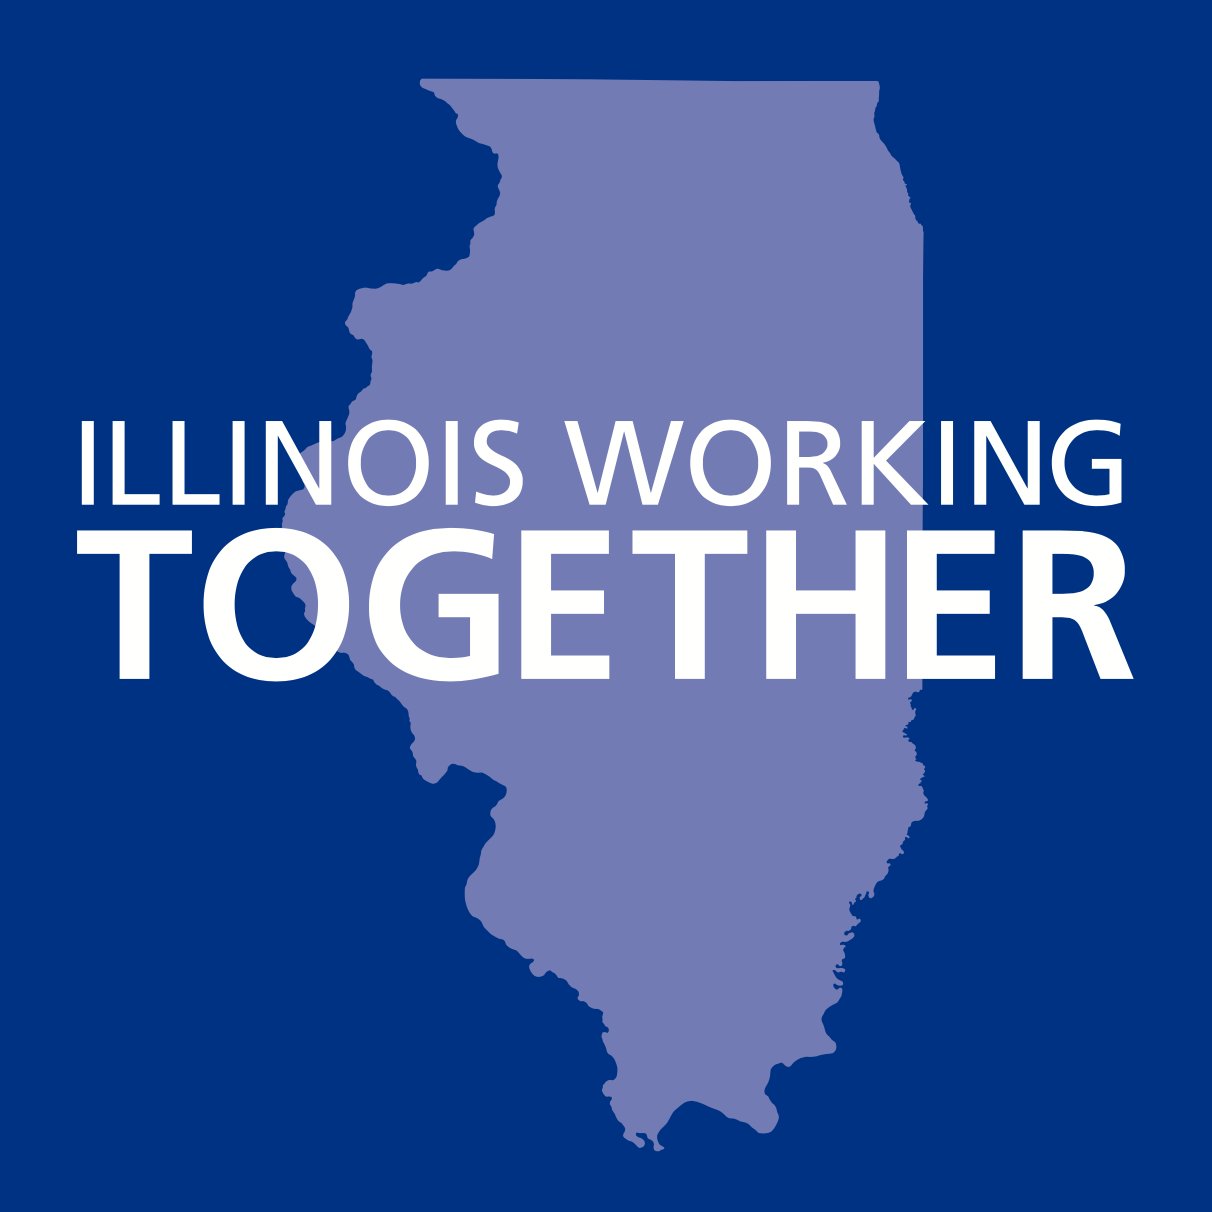 Illinois Working Together is a coalition defending all working families from anti-worker attacks. See more at https://t.co/YAxREqL3yV